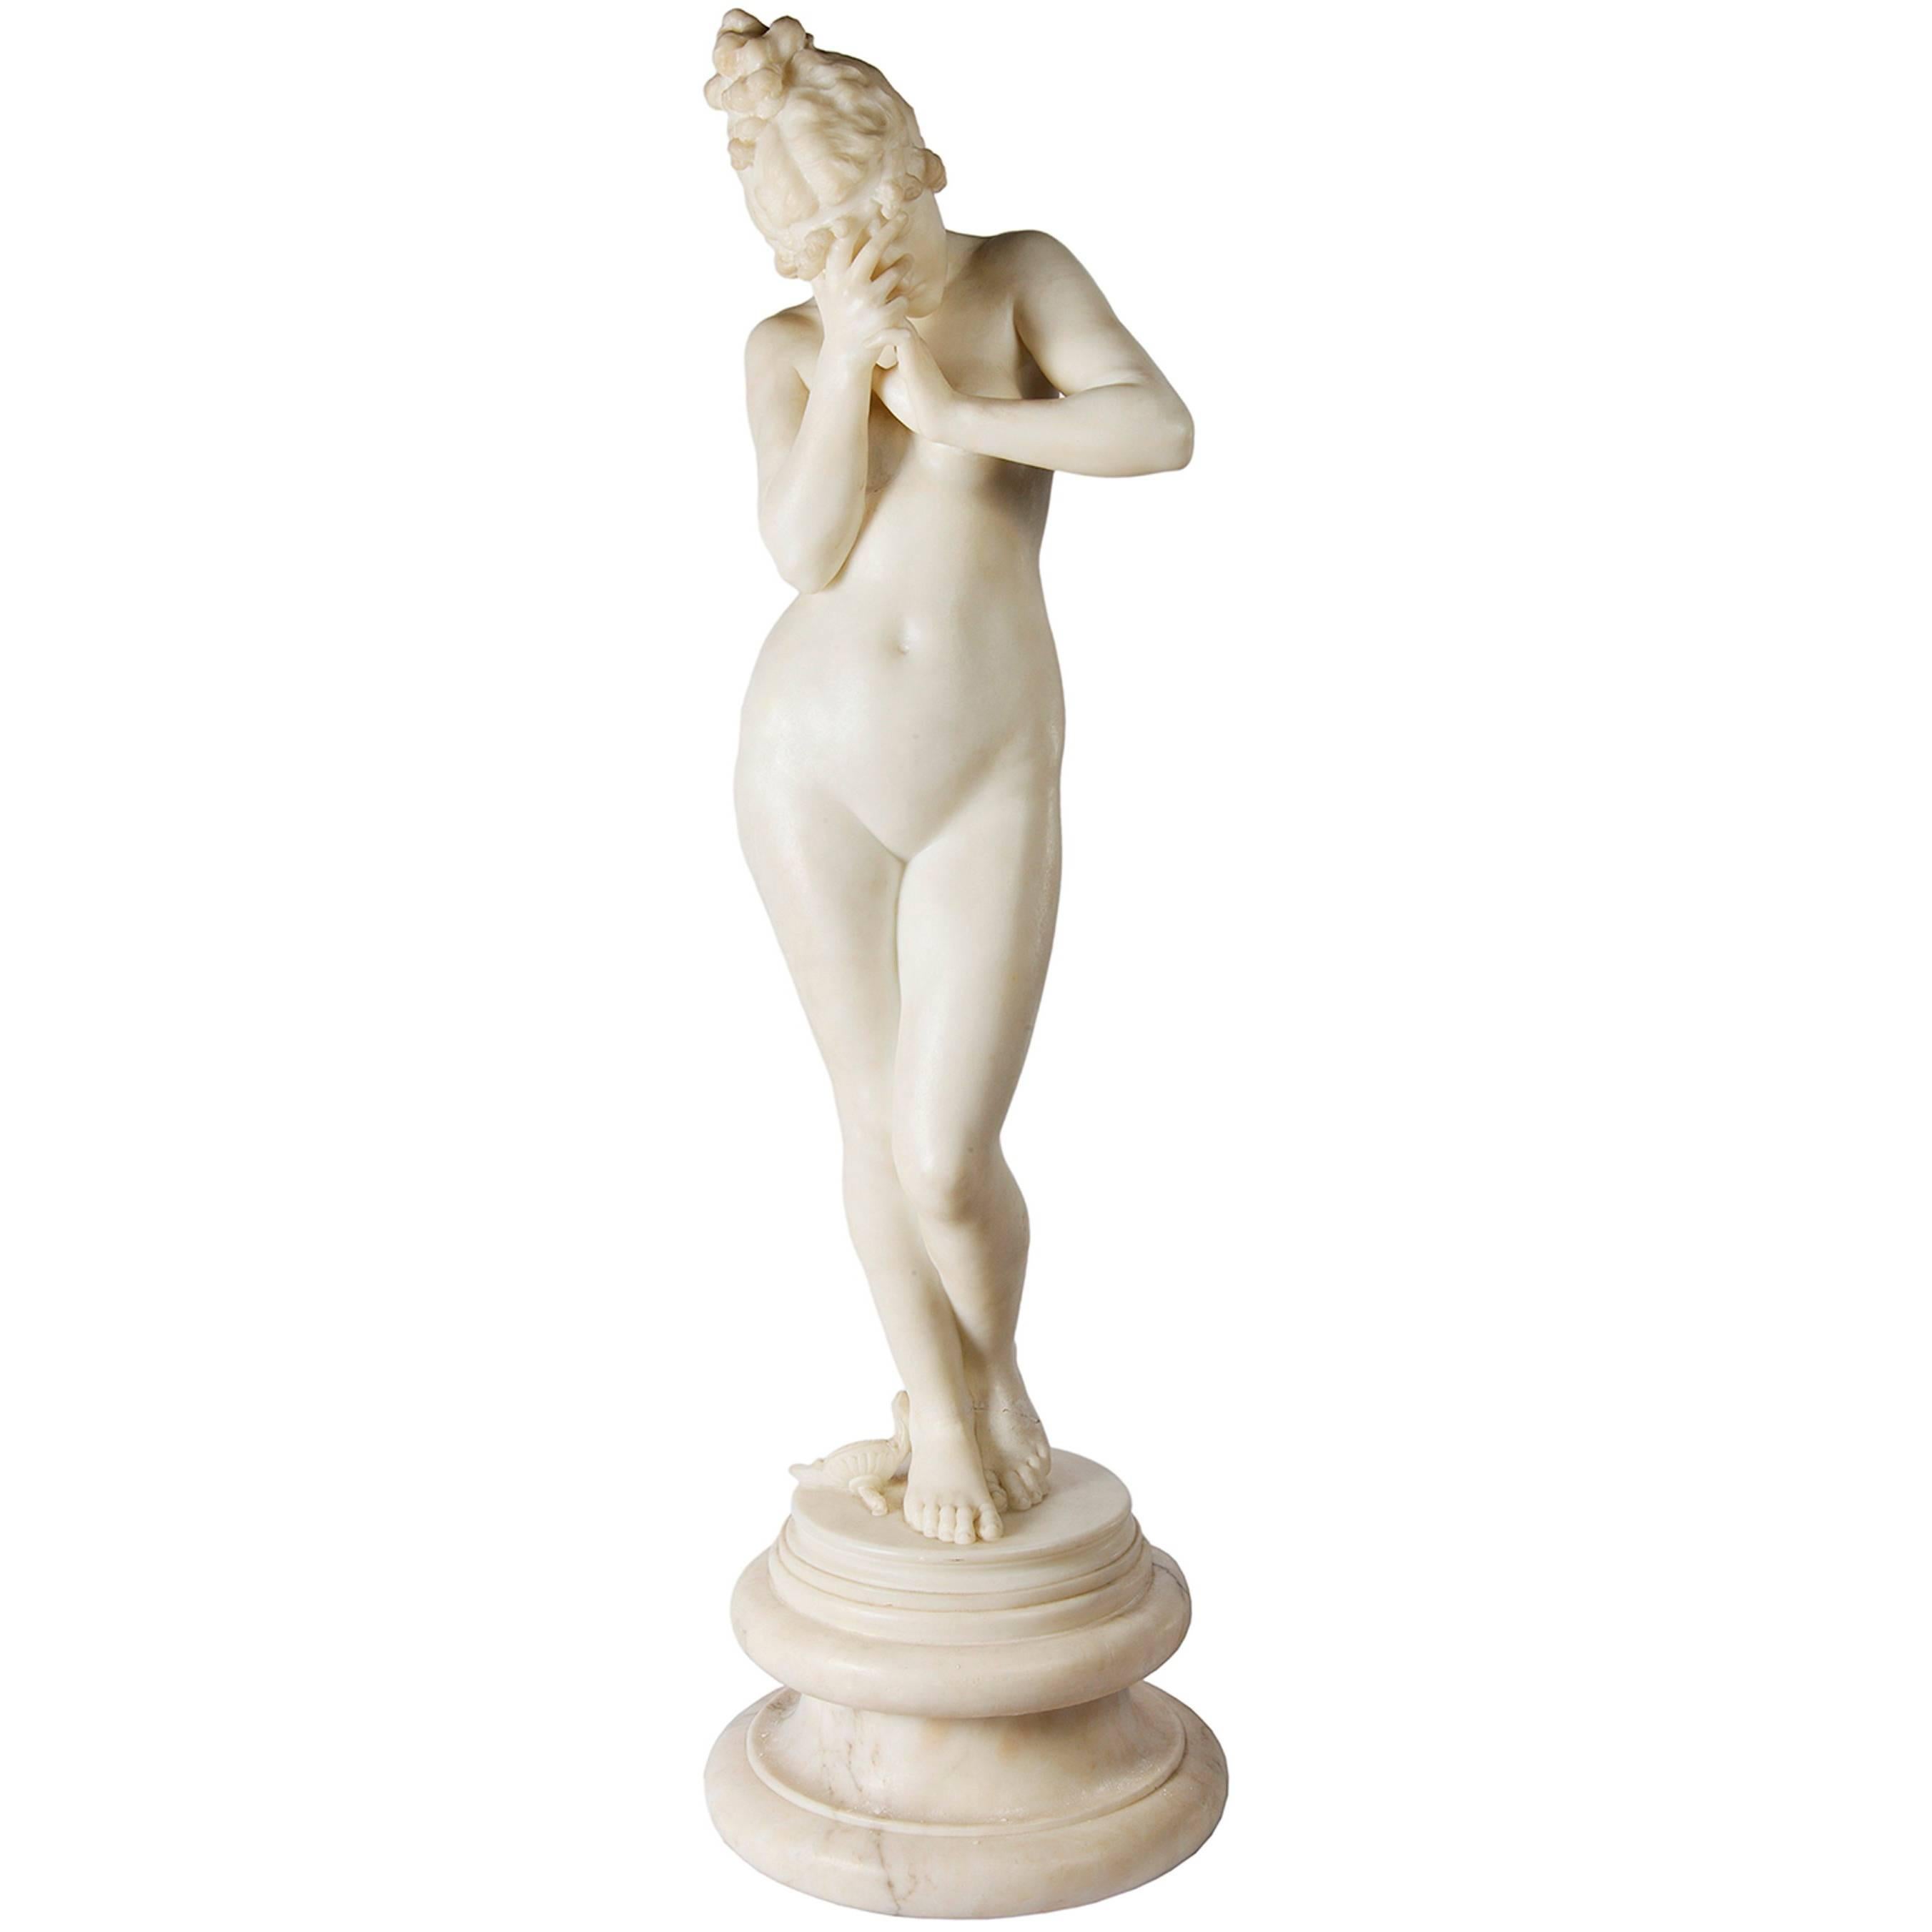 E. Rosa Carved 19th Century Italian Marble Statue of a Nude